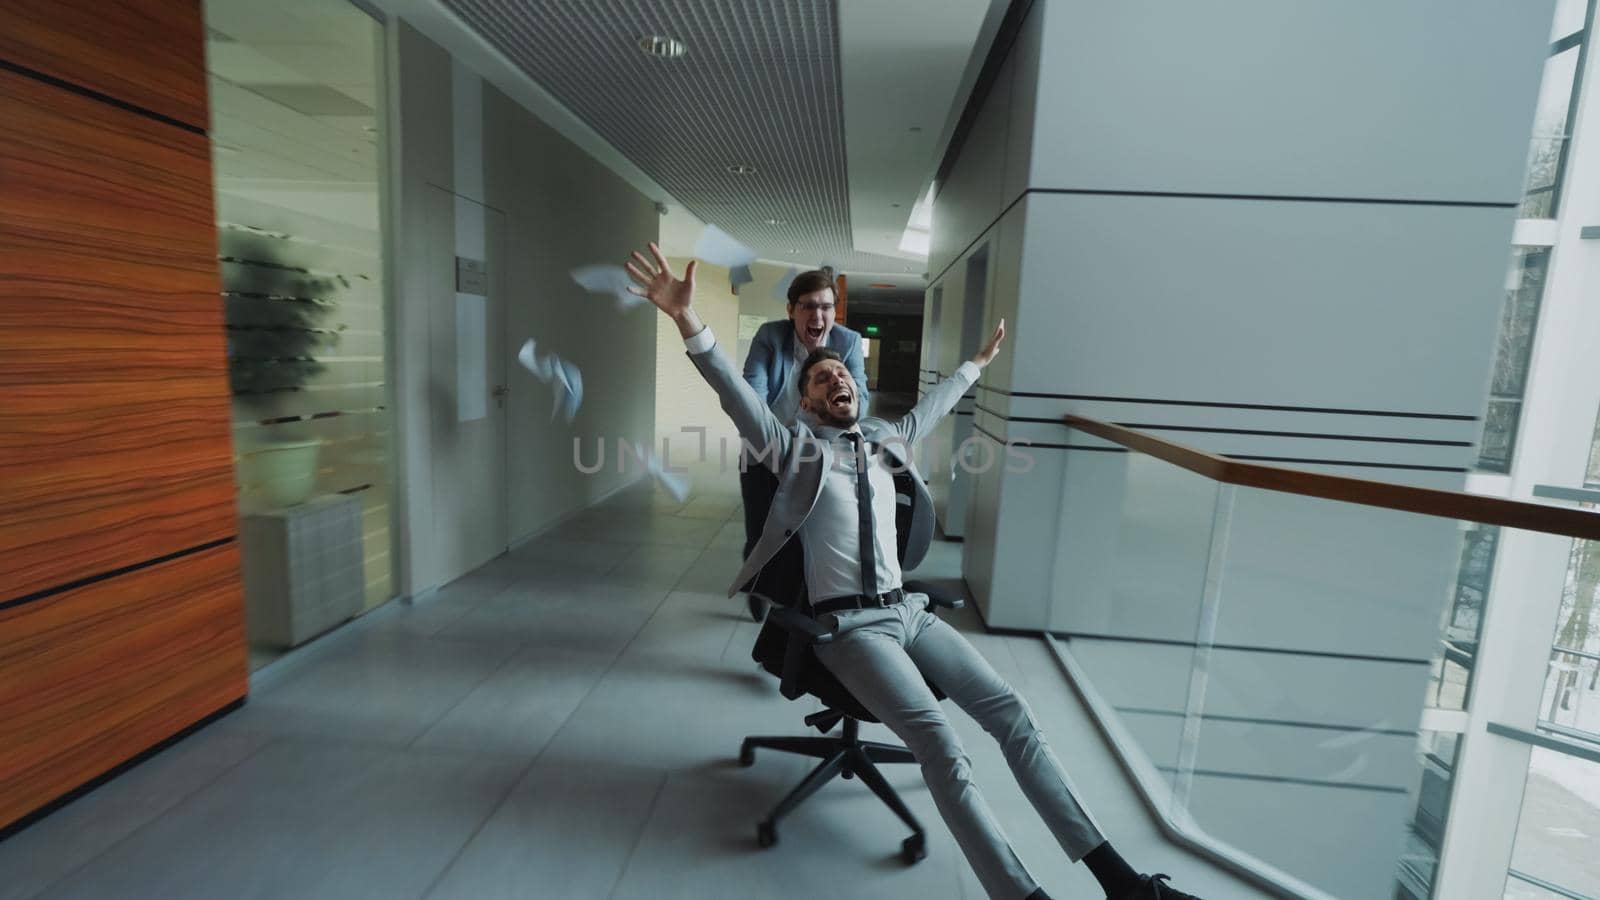 Two crazy businessmen riding office chair and throwing papers up while having fun in lobby of modern business center by silverkblack